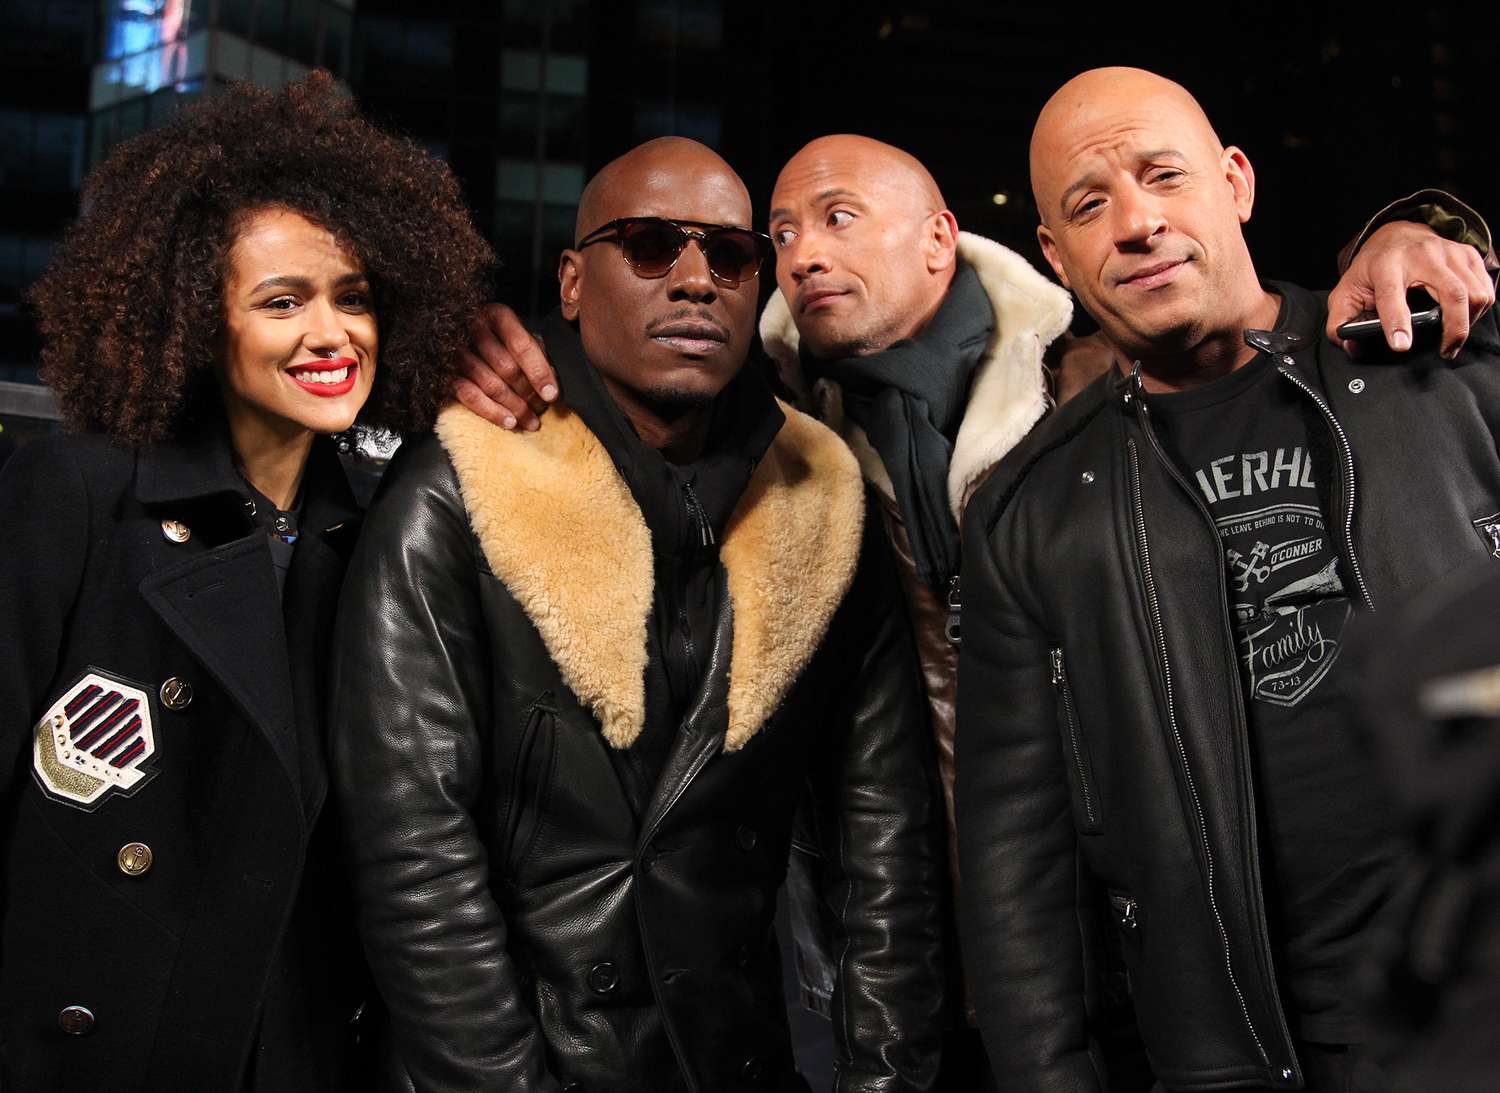 The Cast of "The Fate of The Furious" Present the Film's Trailer Launch in Times Square.